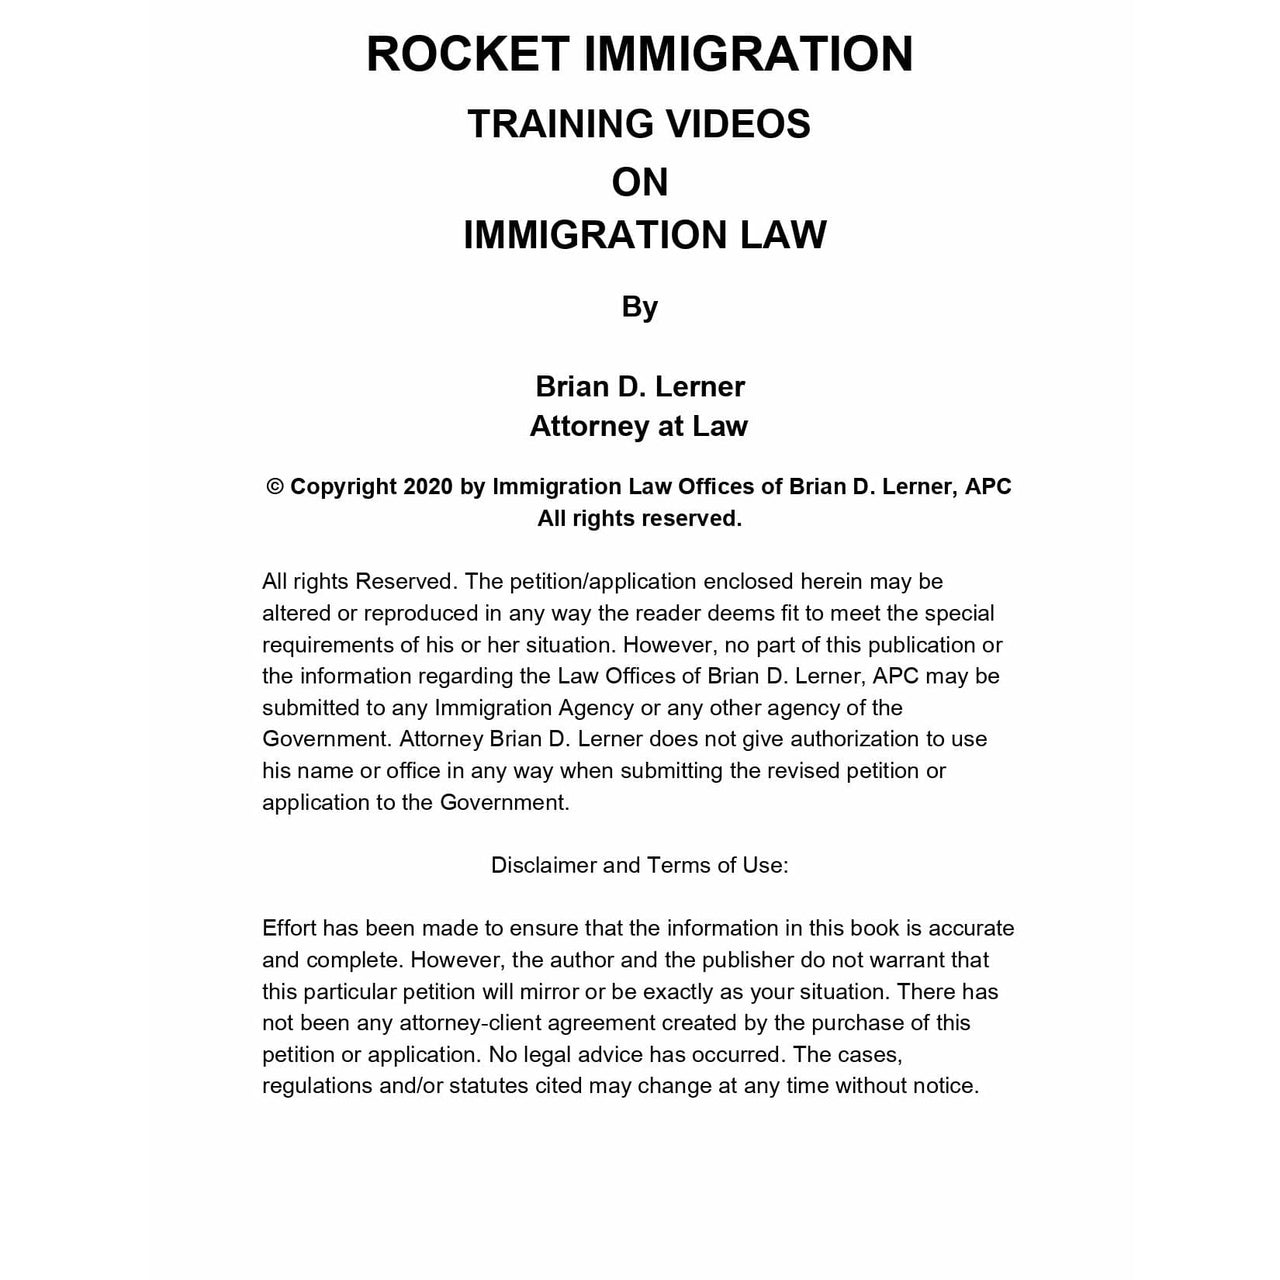 EB-1 Extraordinary Alien Petition Training Course Access Packet - Rocket Immigration Petitions